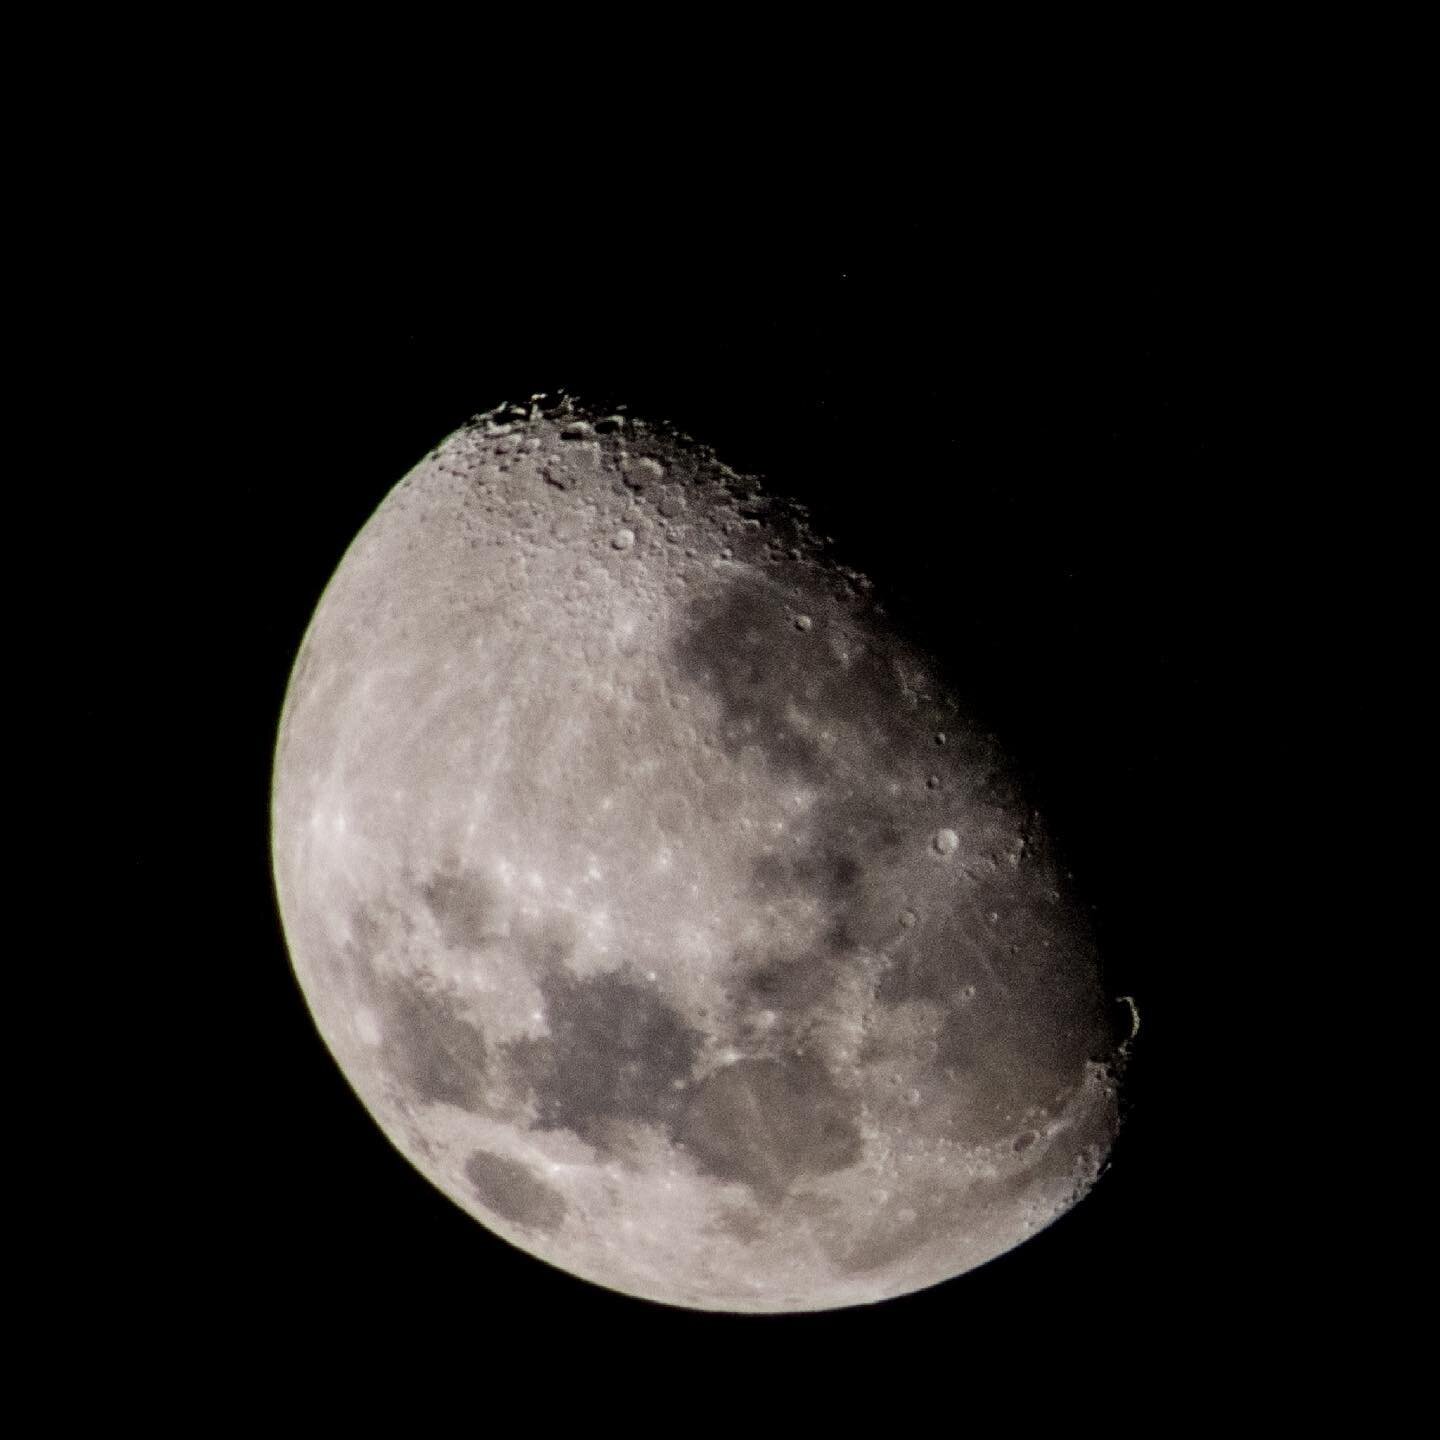 Always wanted to get a nice shot of the moon. 
This is my first attempt.. 
300mm lens with a 1.5x extender. 
Raw DNG on the Pocket 6k Pro. 

🌙 📸 🎥💚
.
. 
.
.
.
#moon #telephoto #space  #canon #australia #blackmagicdesign #davinciresolve #advertisi